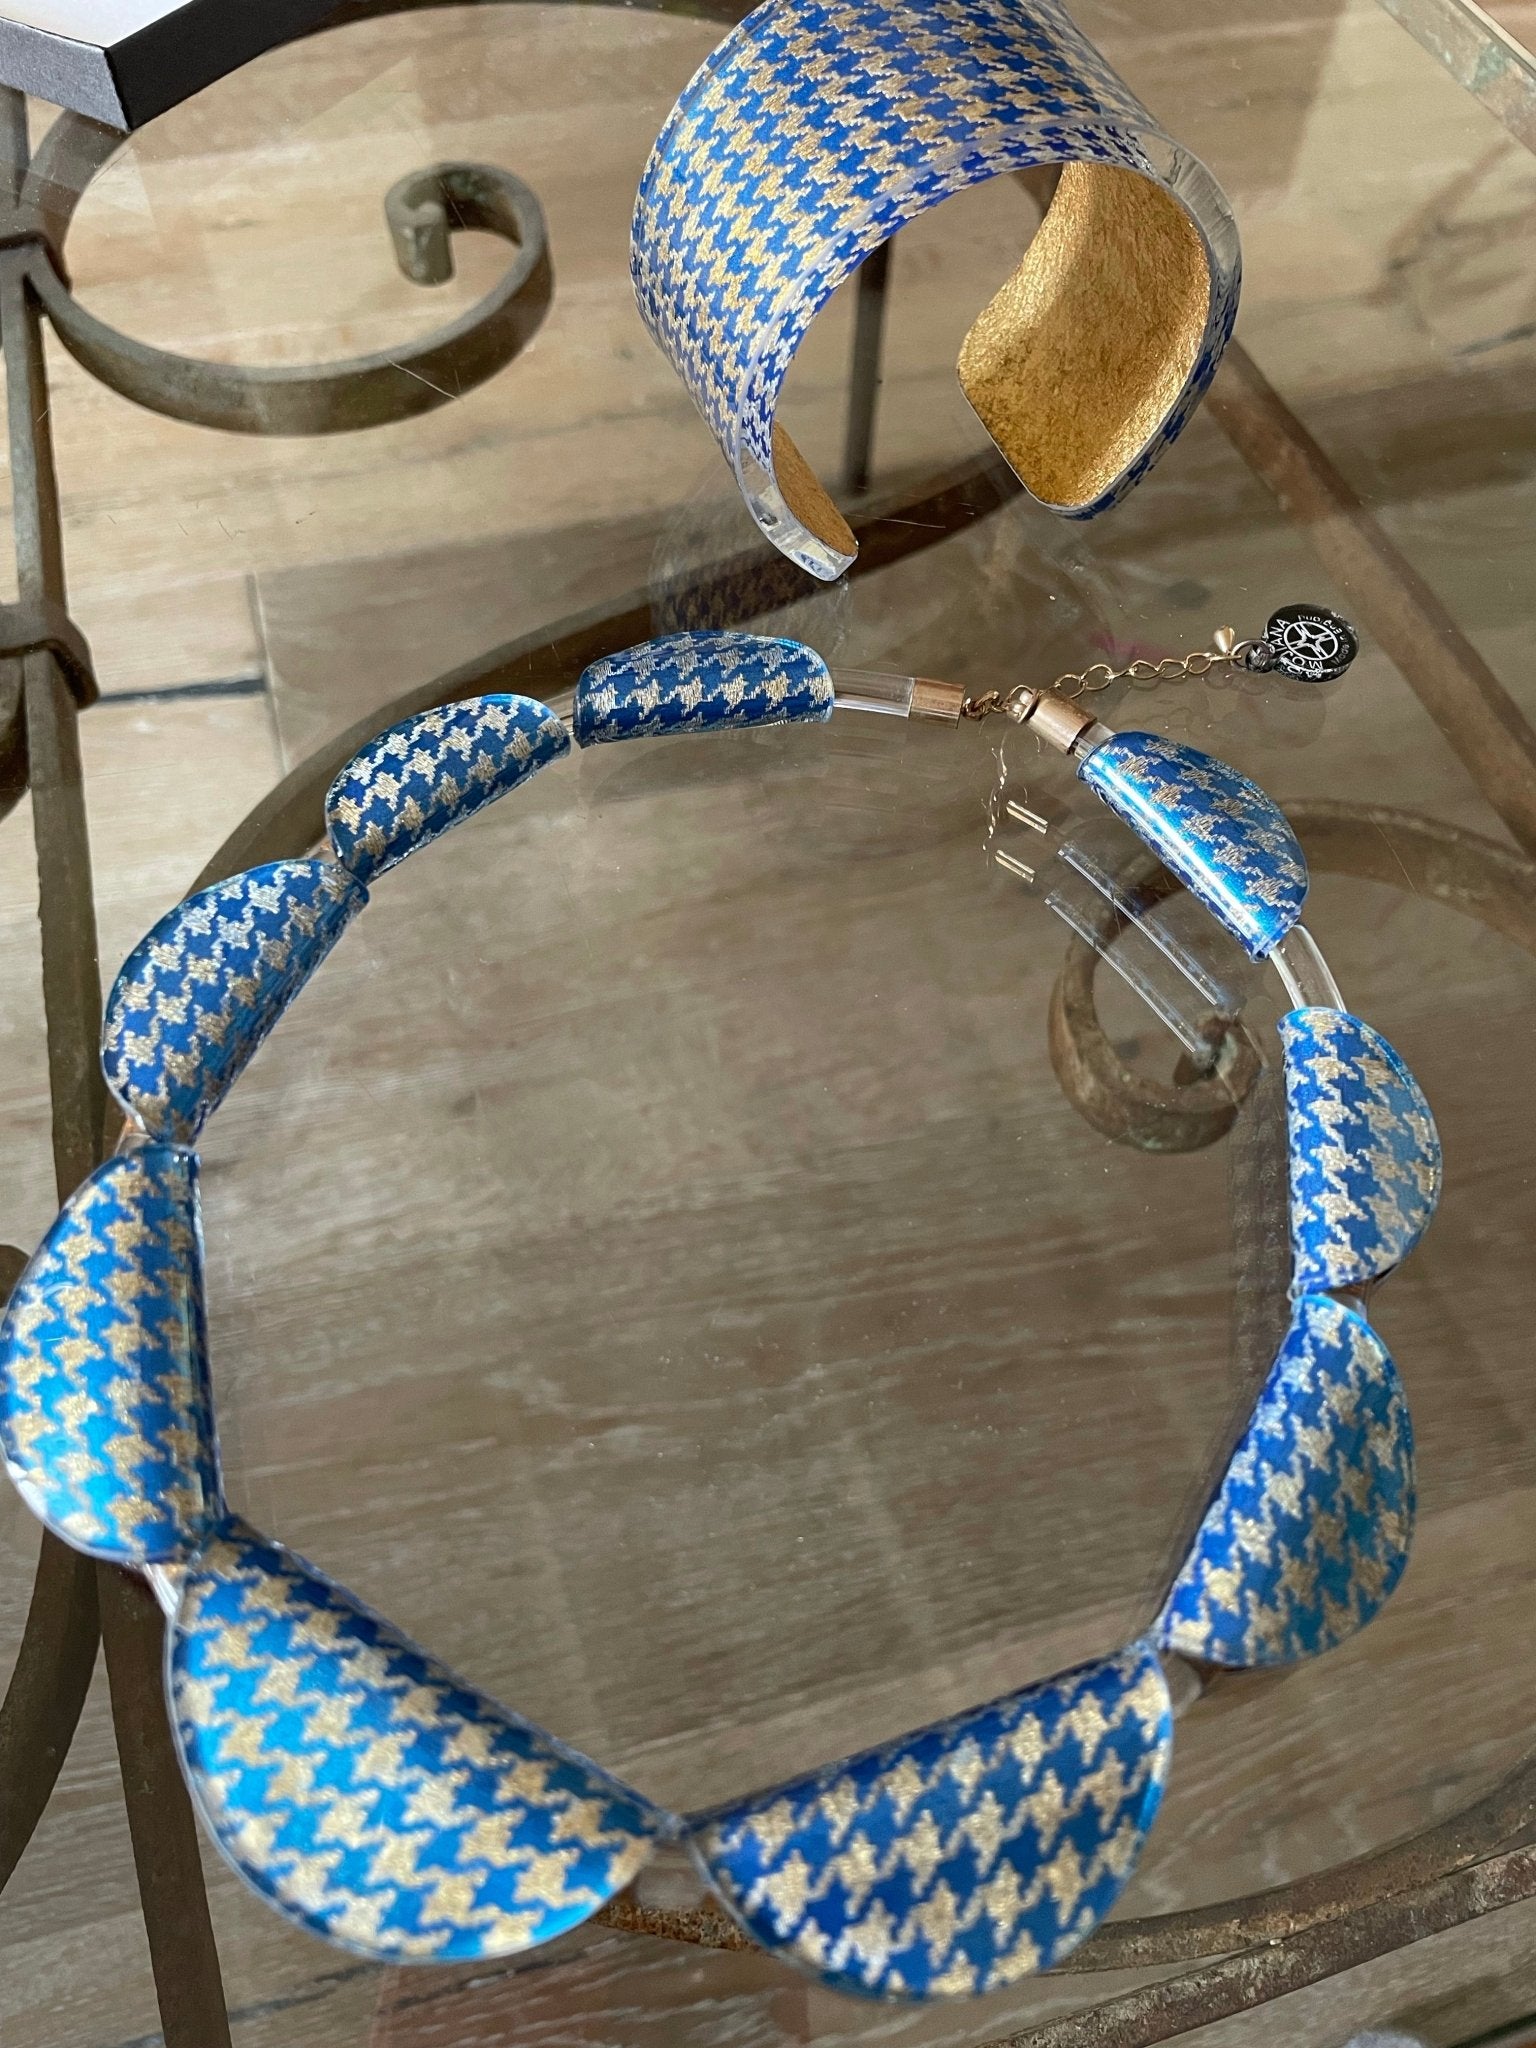 Houndstooth necklace and cuff by Mojiana designs - Natalia Willmott